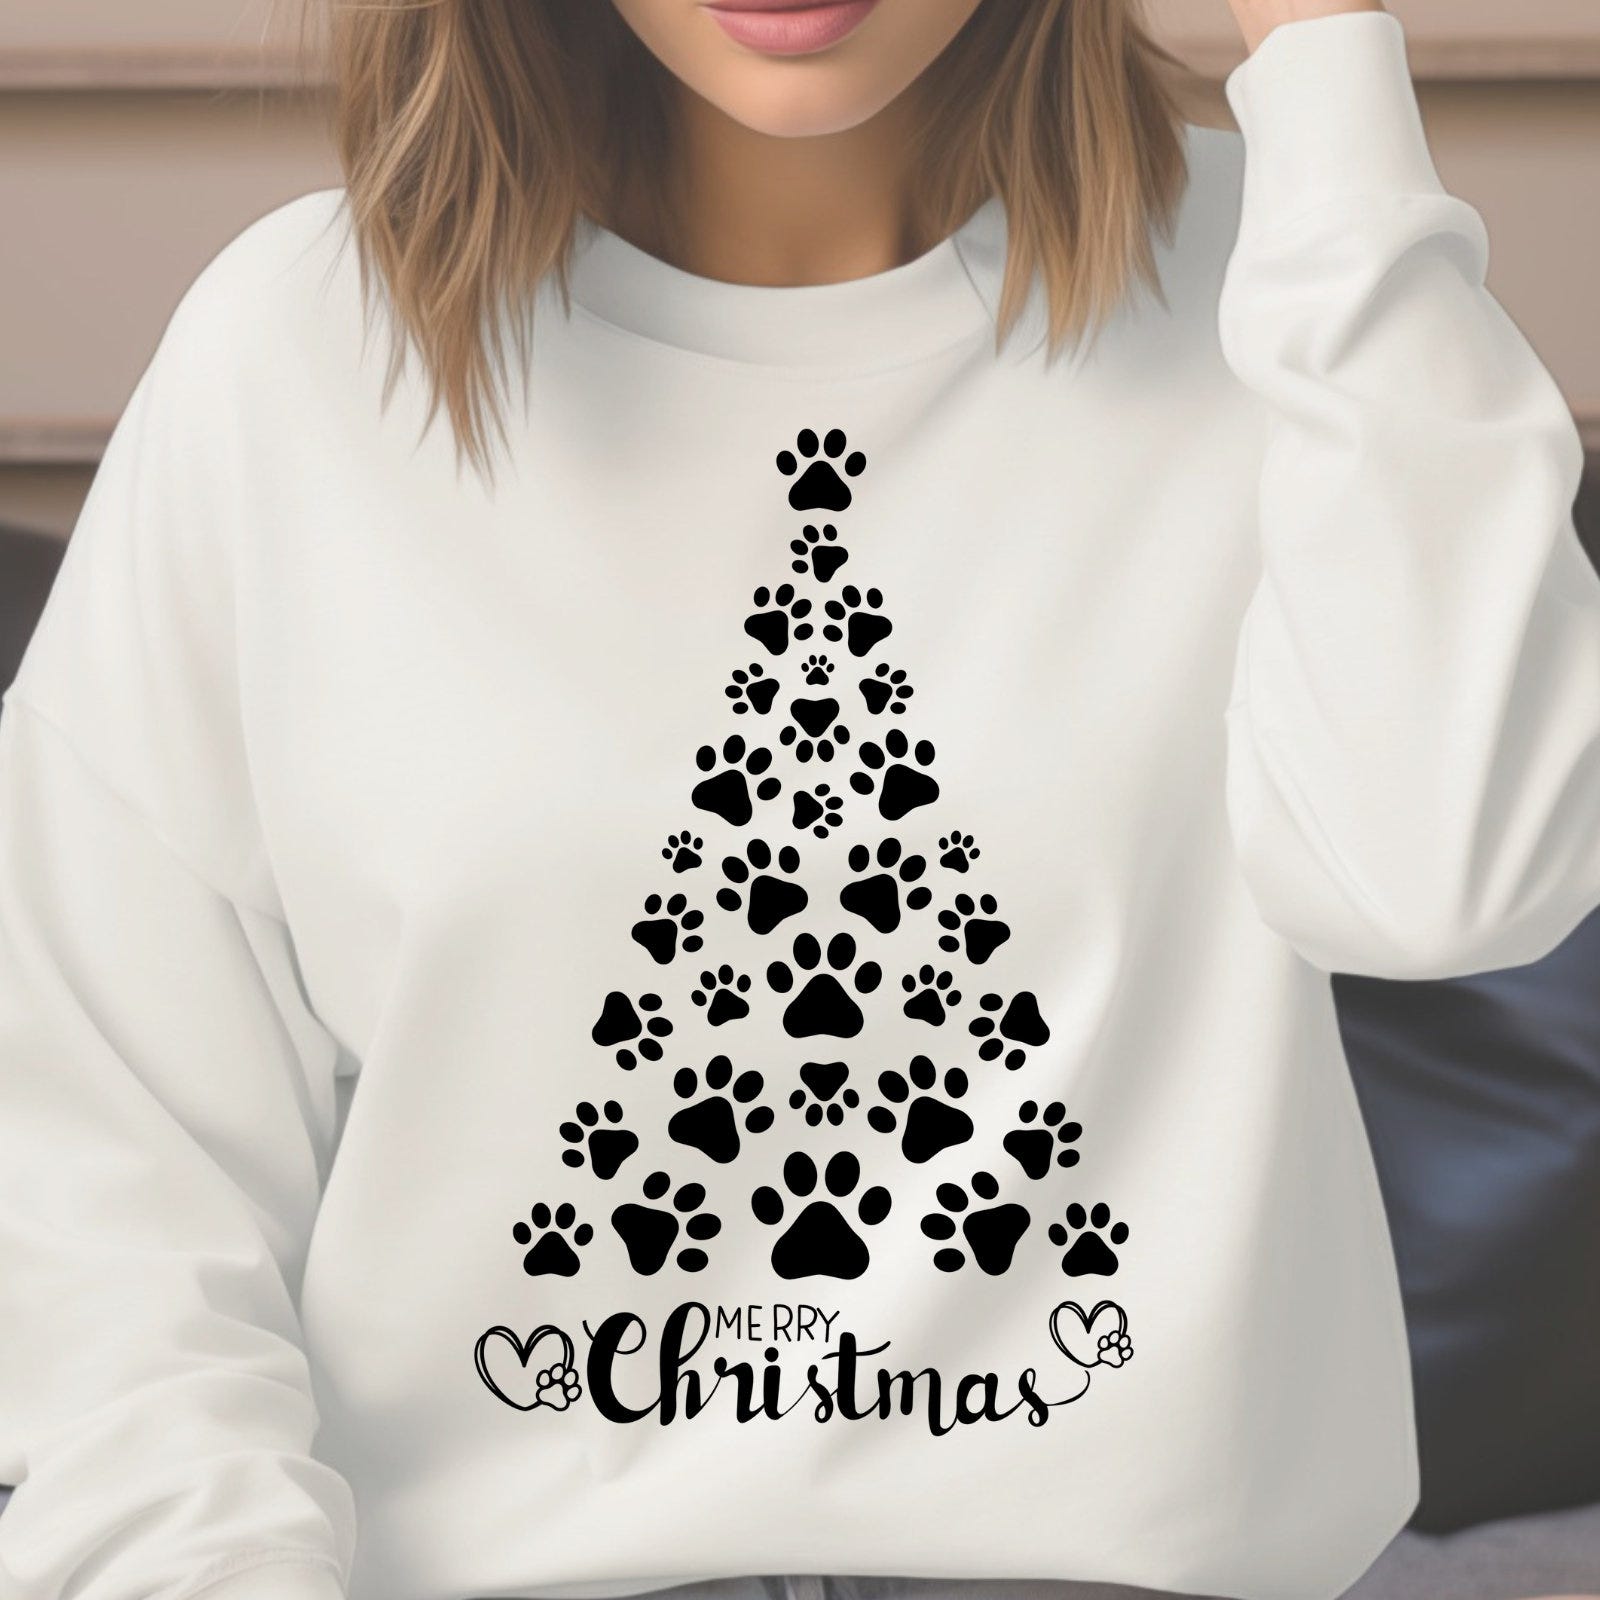 Merry Christmas Paw Tree Svg, Retro Christmas Png, Paw Print Svg, Christmas Heart Paws Svg, Christmas Tree With Paw Png, Digital Download